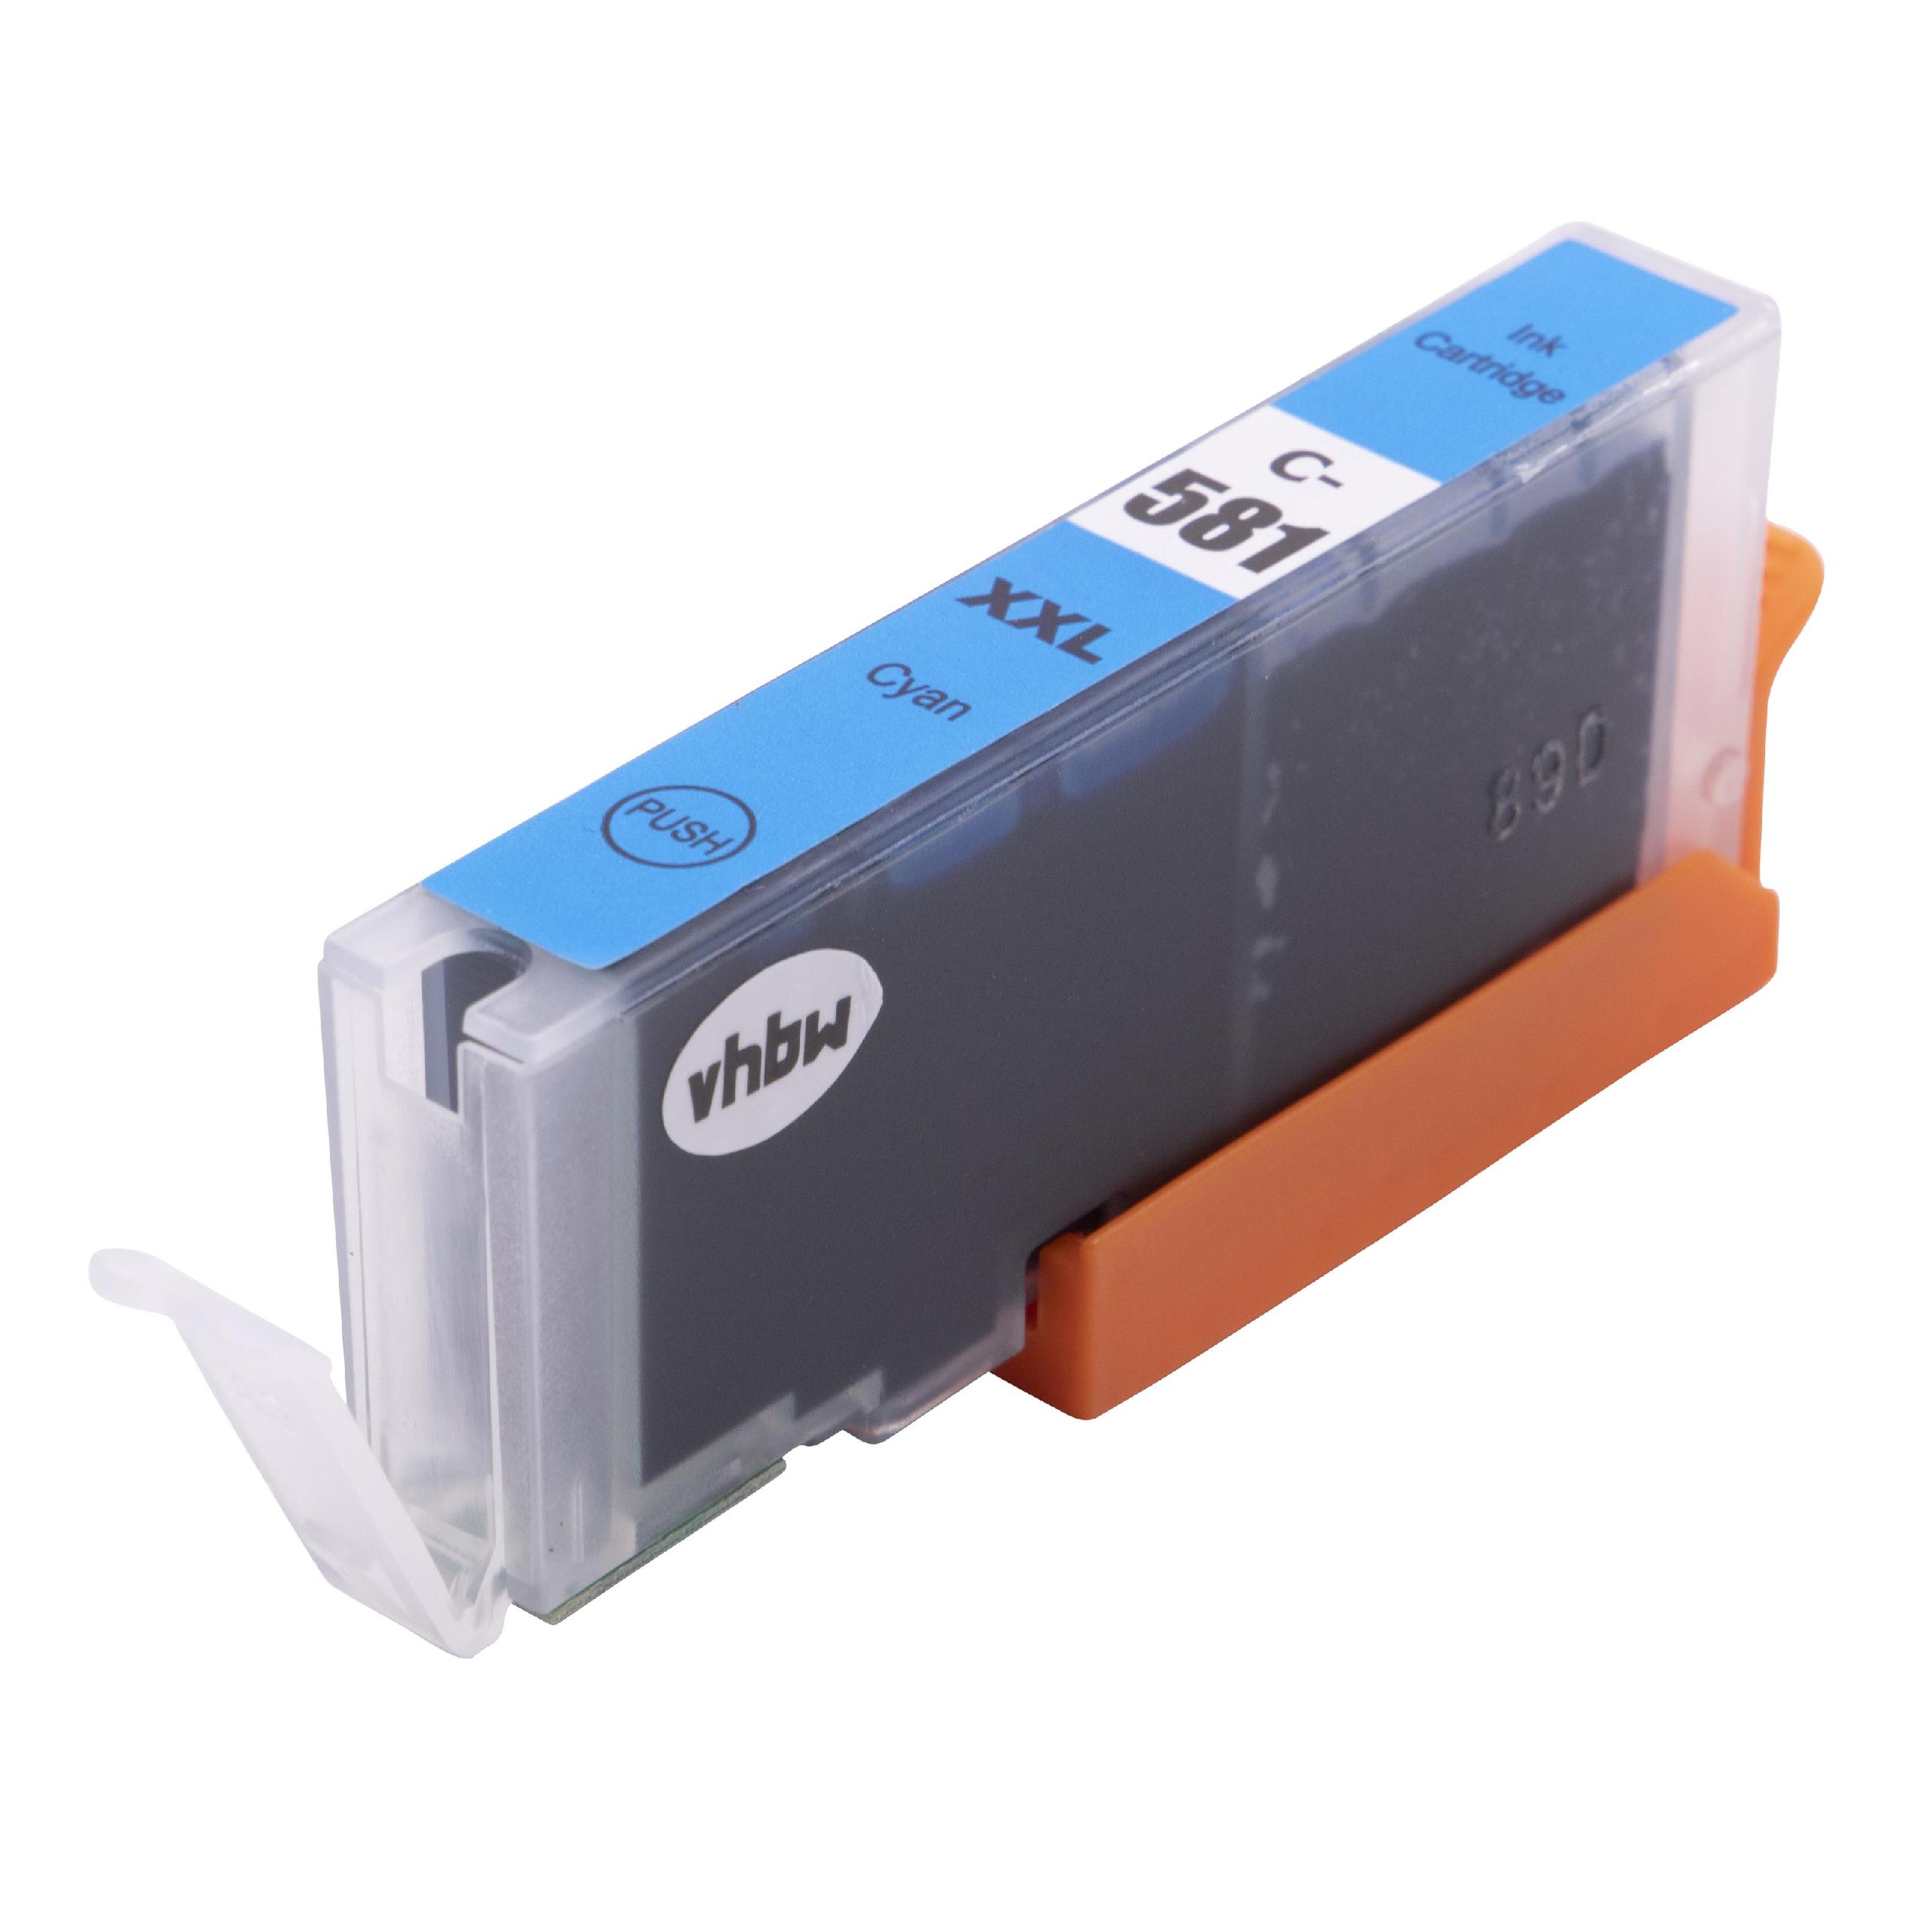 Ink Cartridge as Exchange for Canon CLI-581 XXL, CLI-581PGC XXL for Canon Printer - Cyan 12 ml + Chip